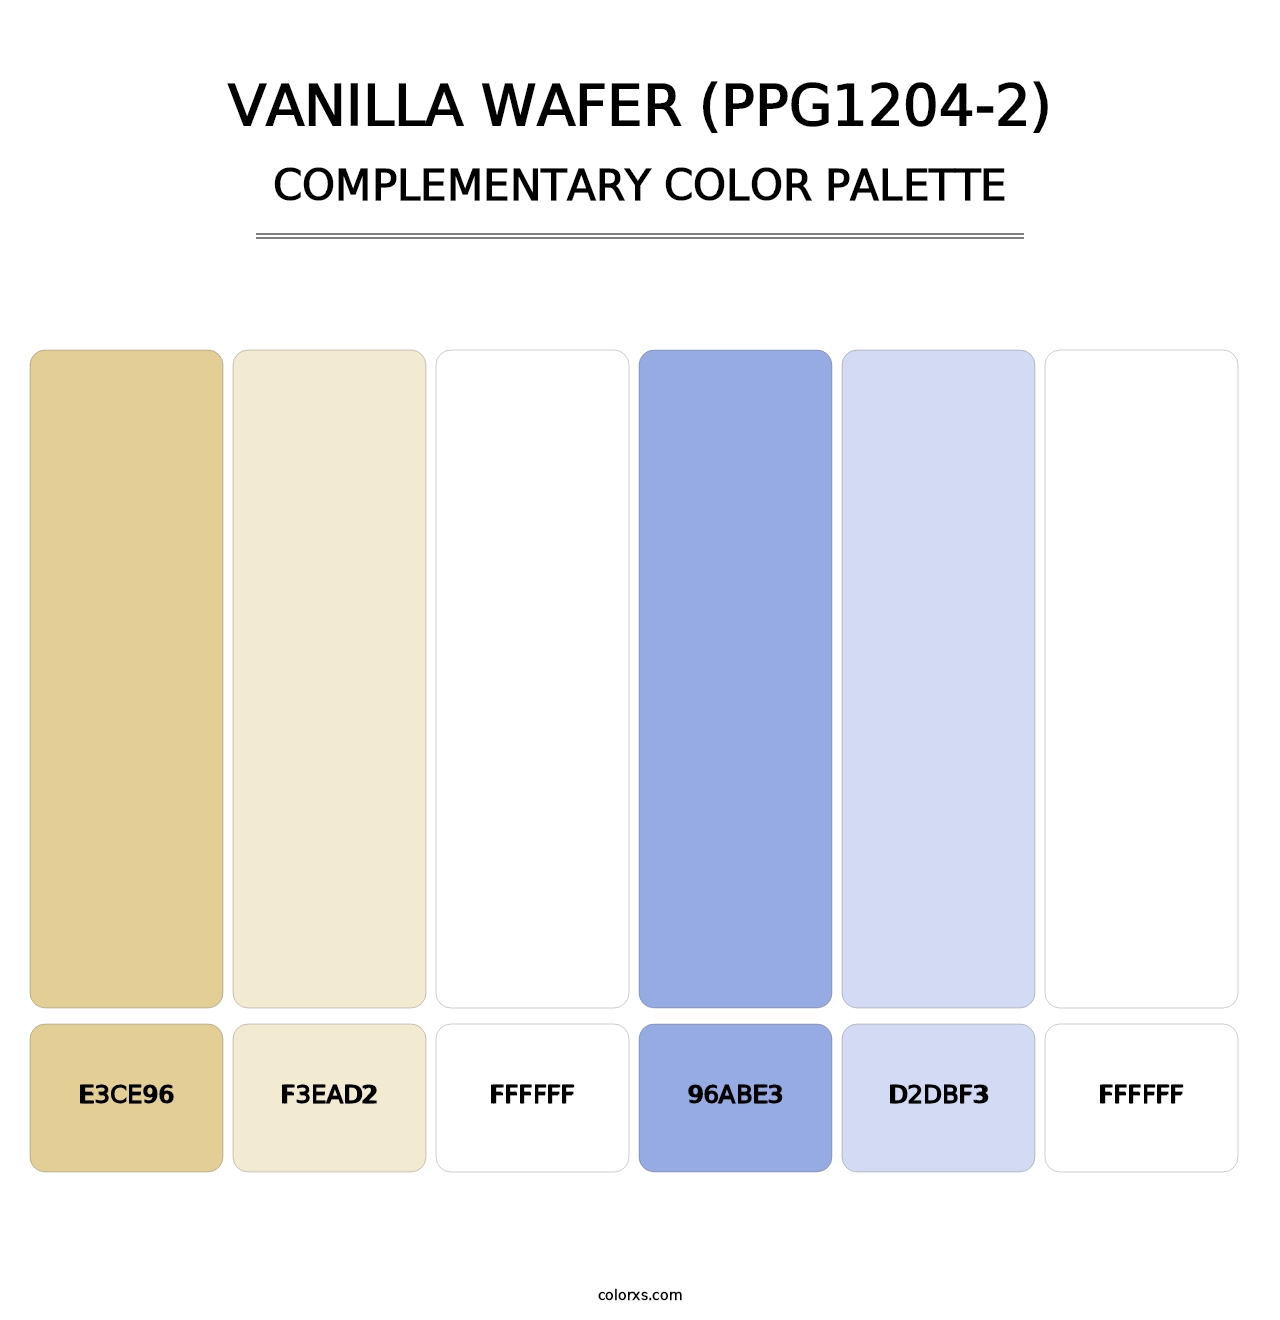 Vanilla Wafer (PPG1204-2) - Complementary Color Palette